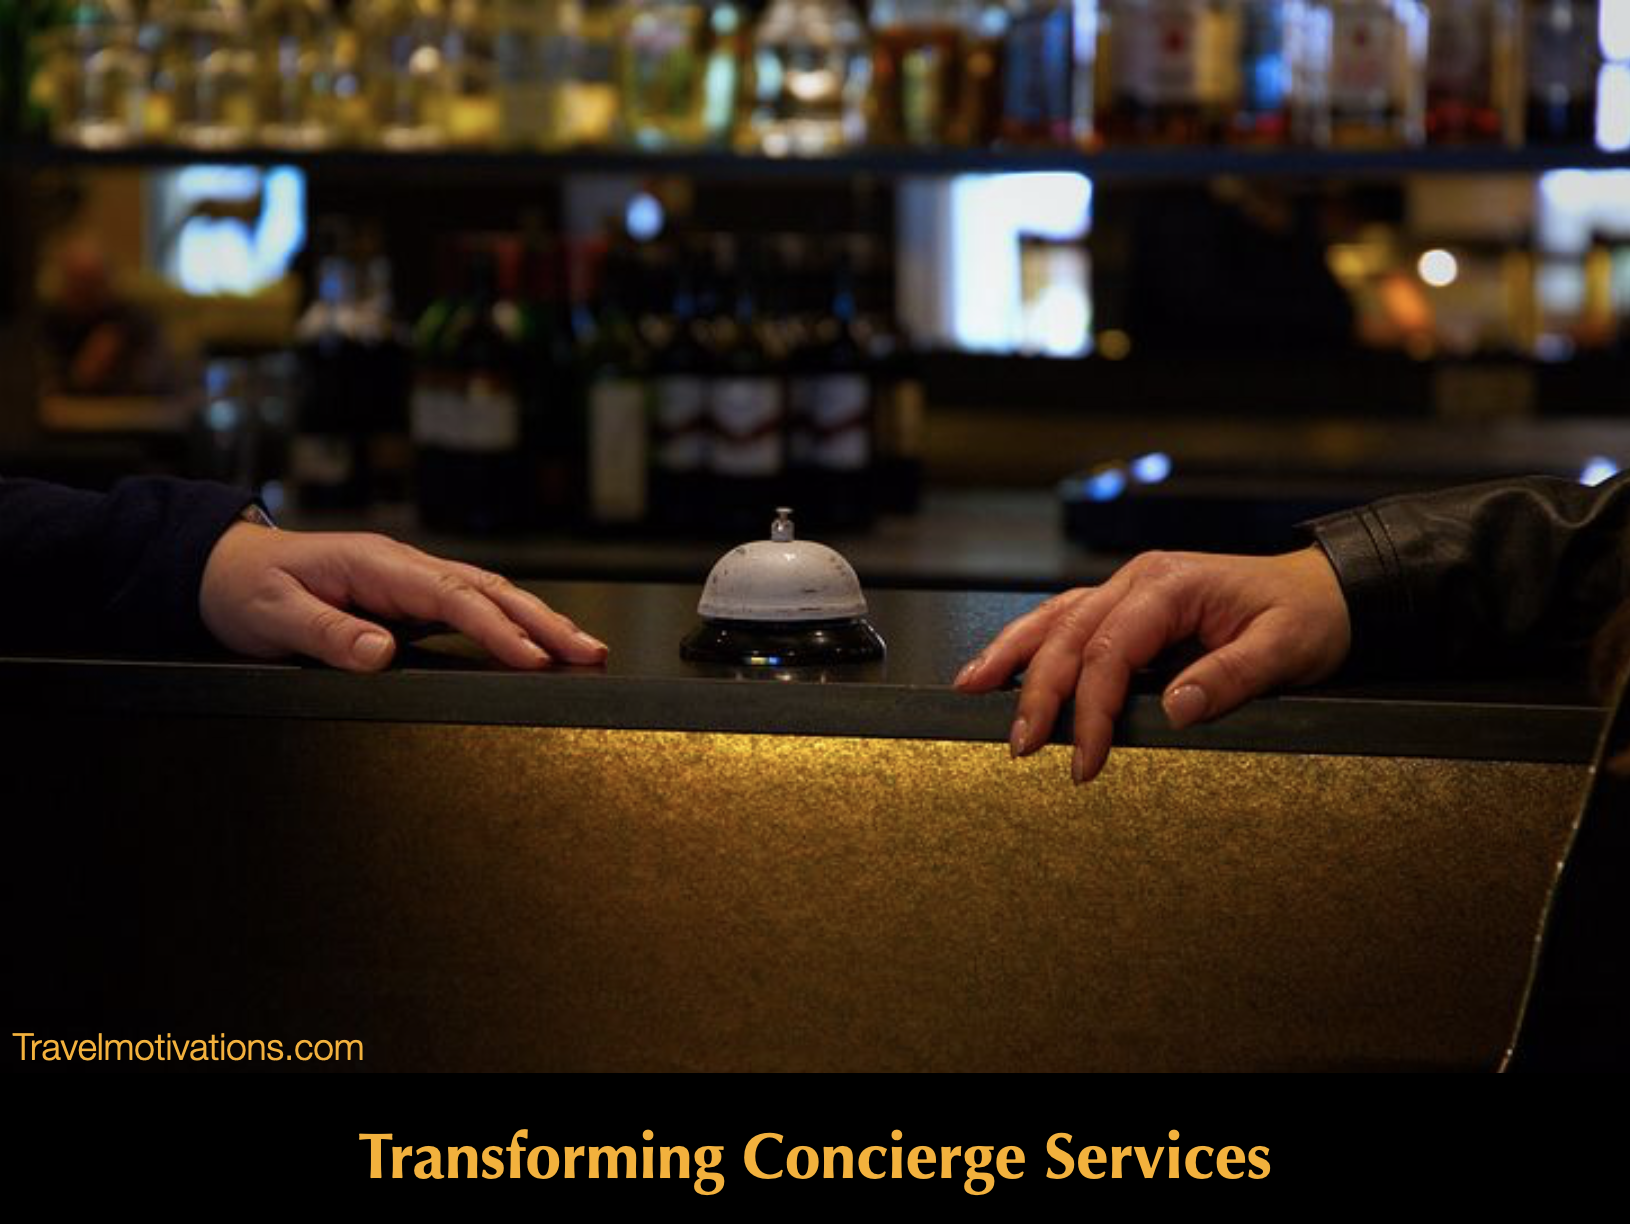 HOW CONCIERGE SERVICES ARE TRANSFORMING LUXURY